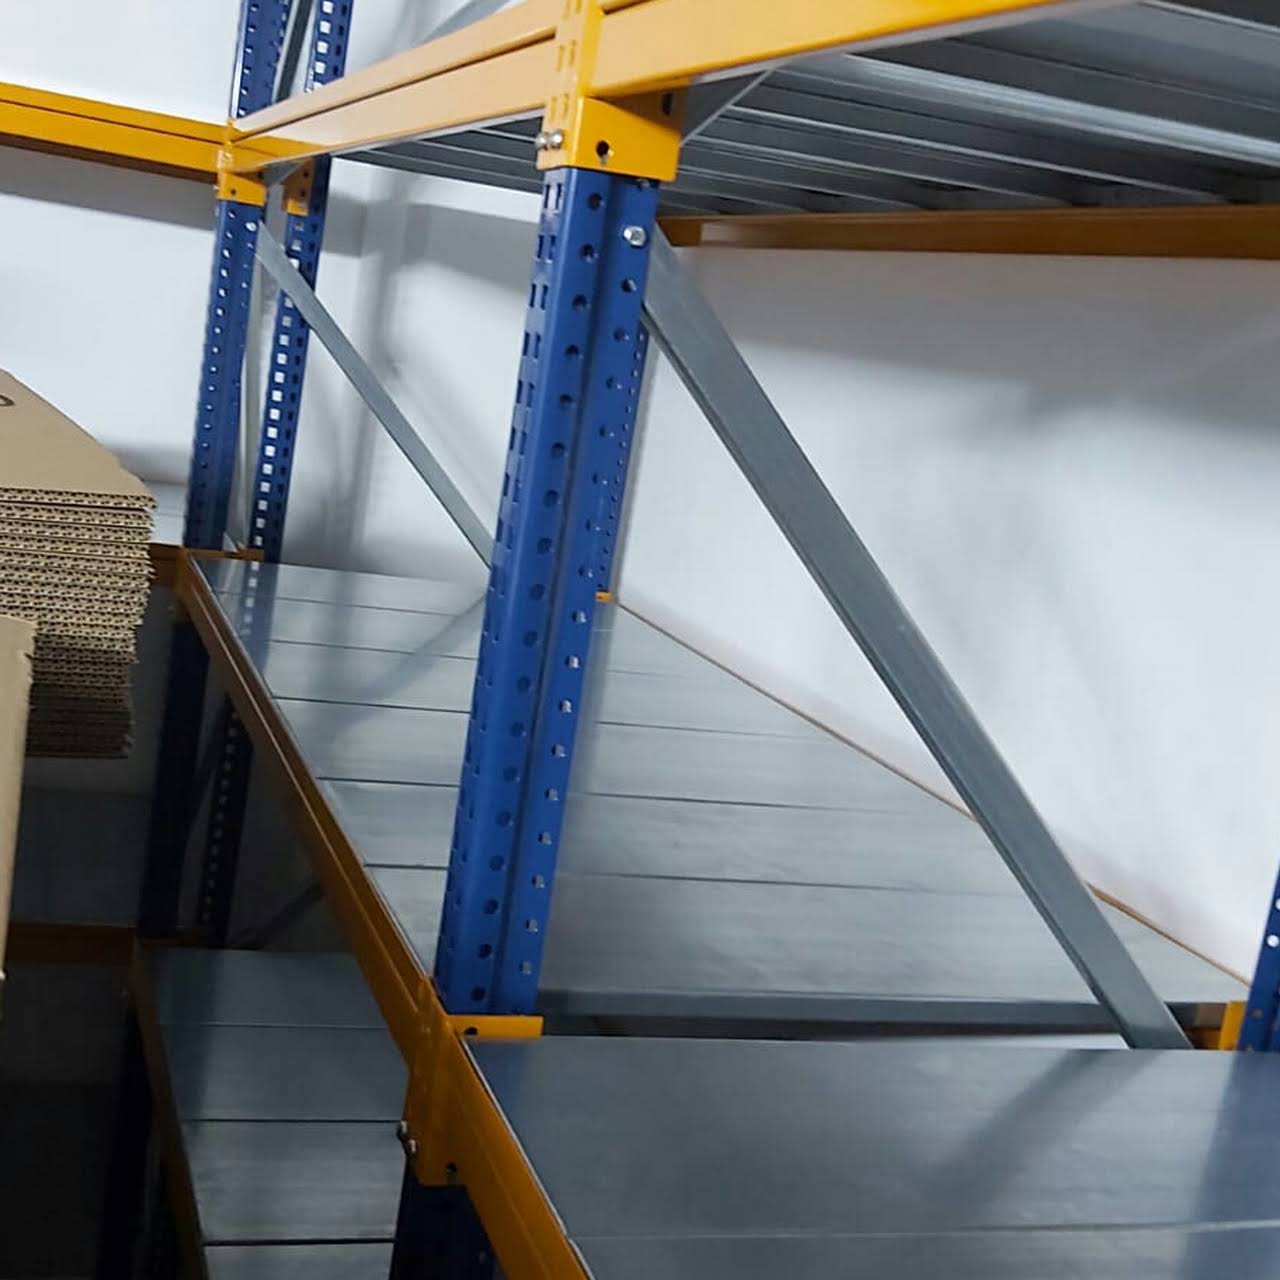 Light duty racking systems